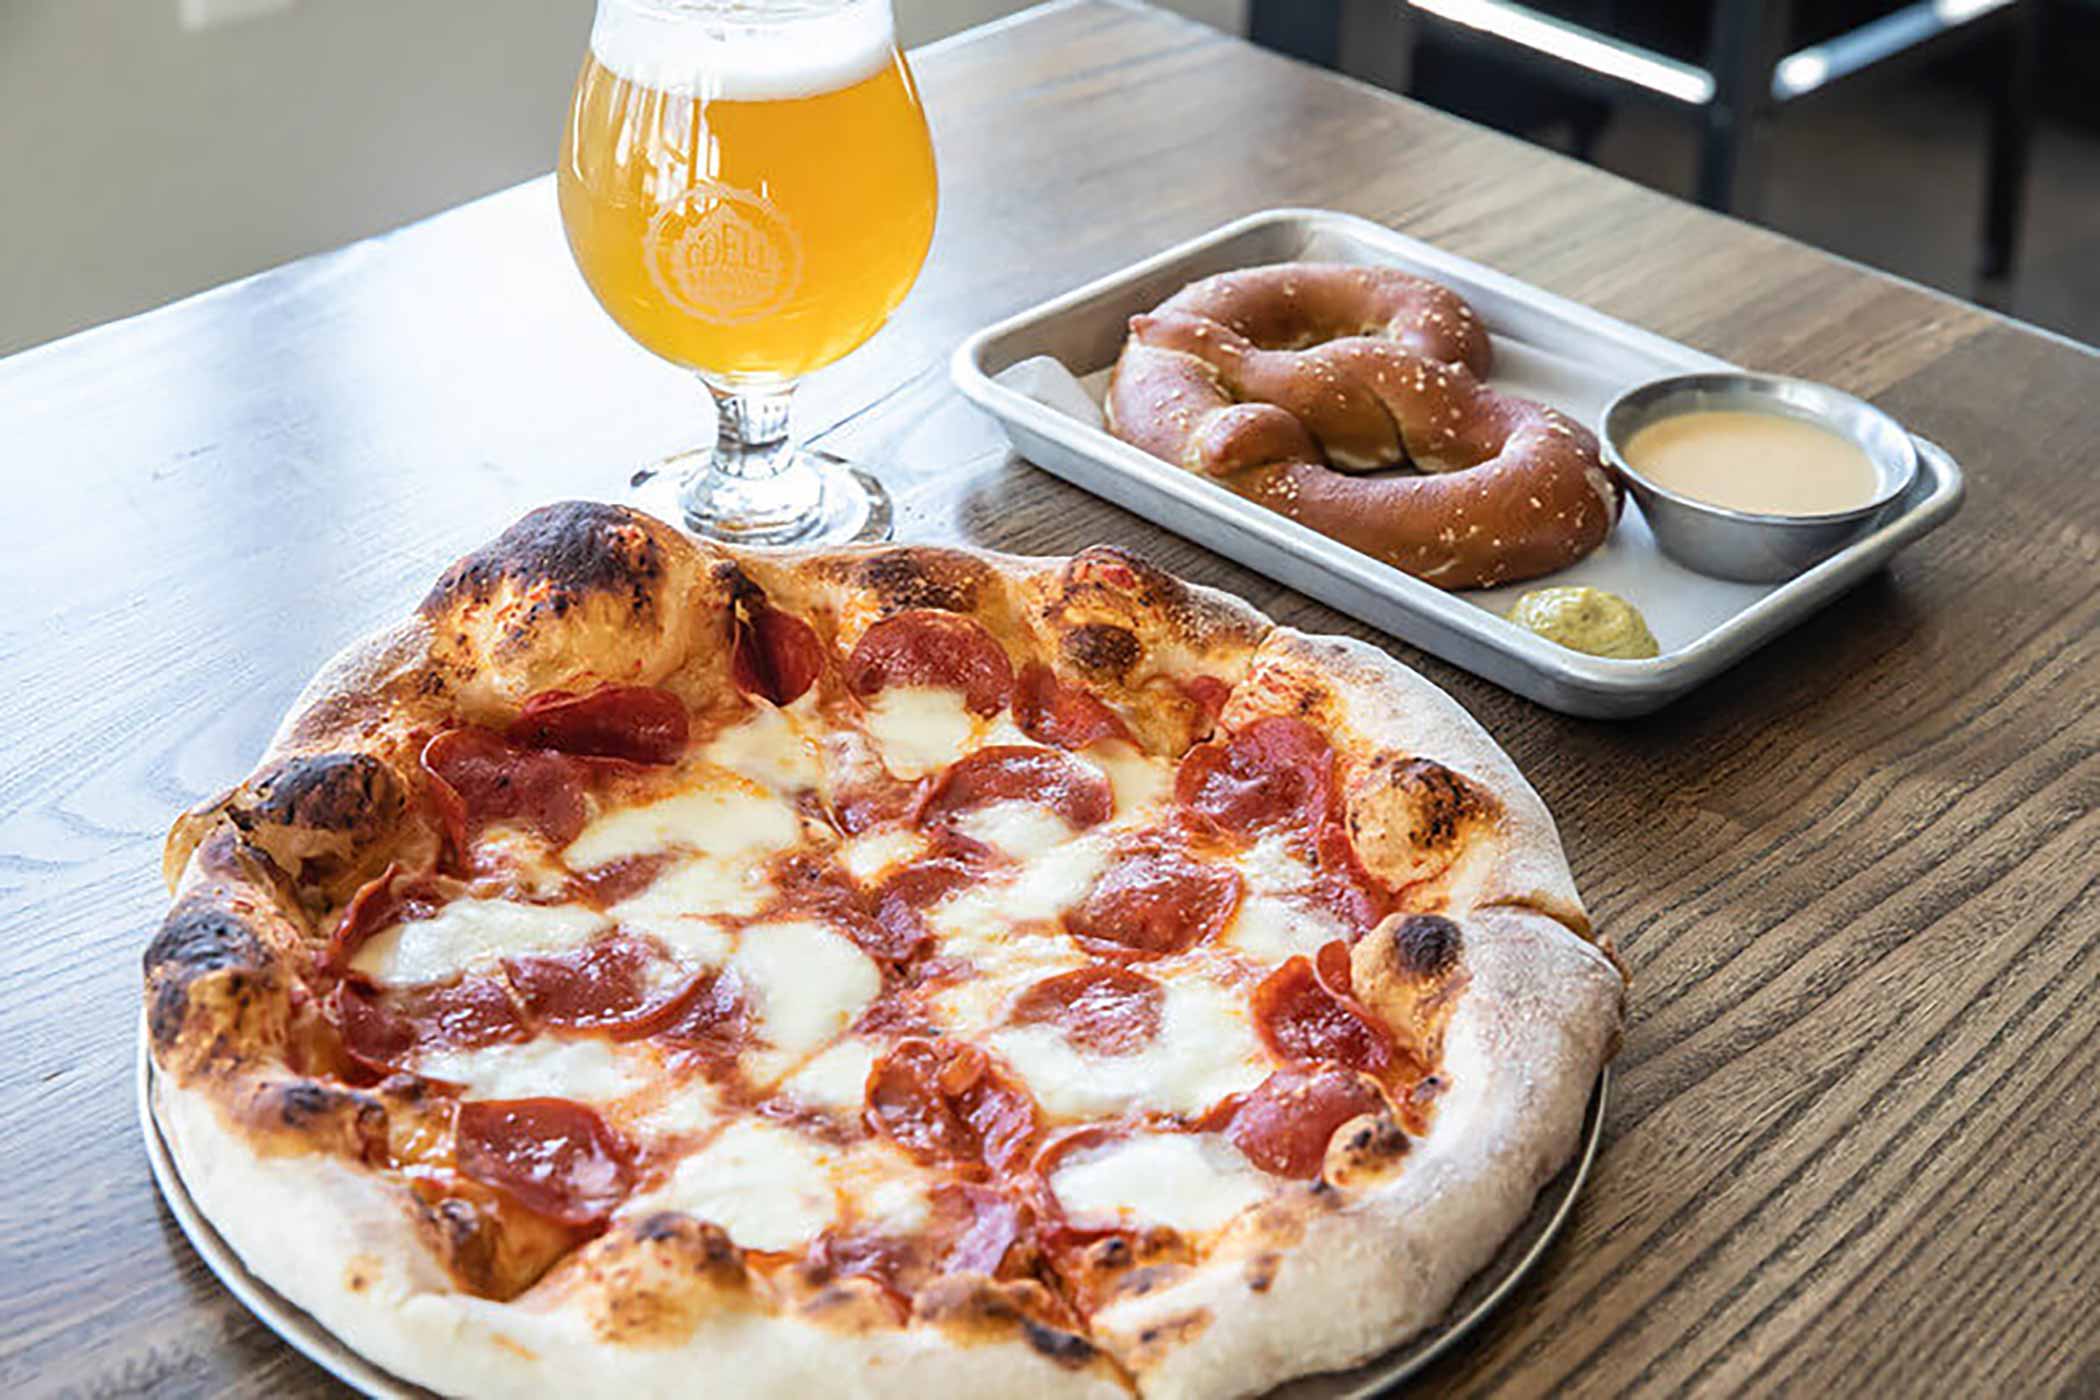 The 5-Minute Guide to Pairing Pizza and Beer